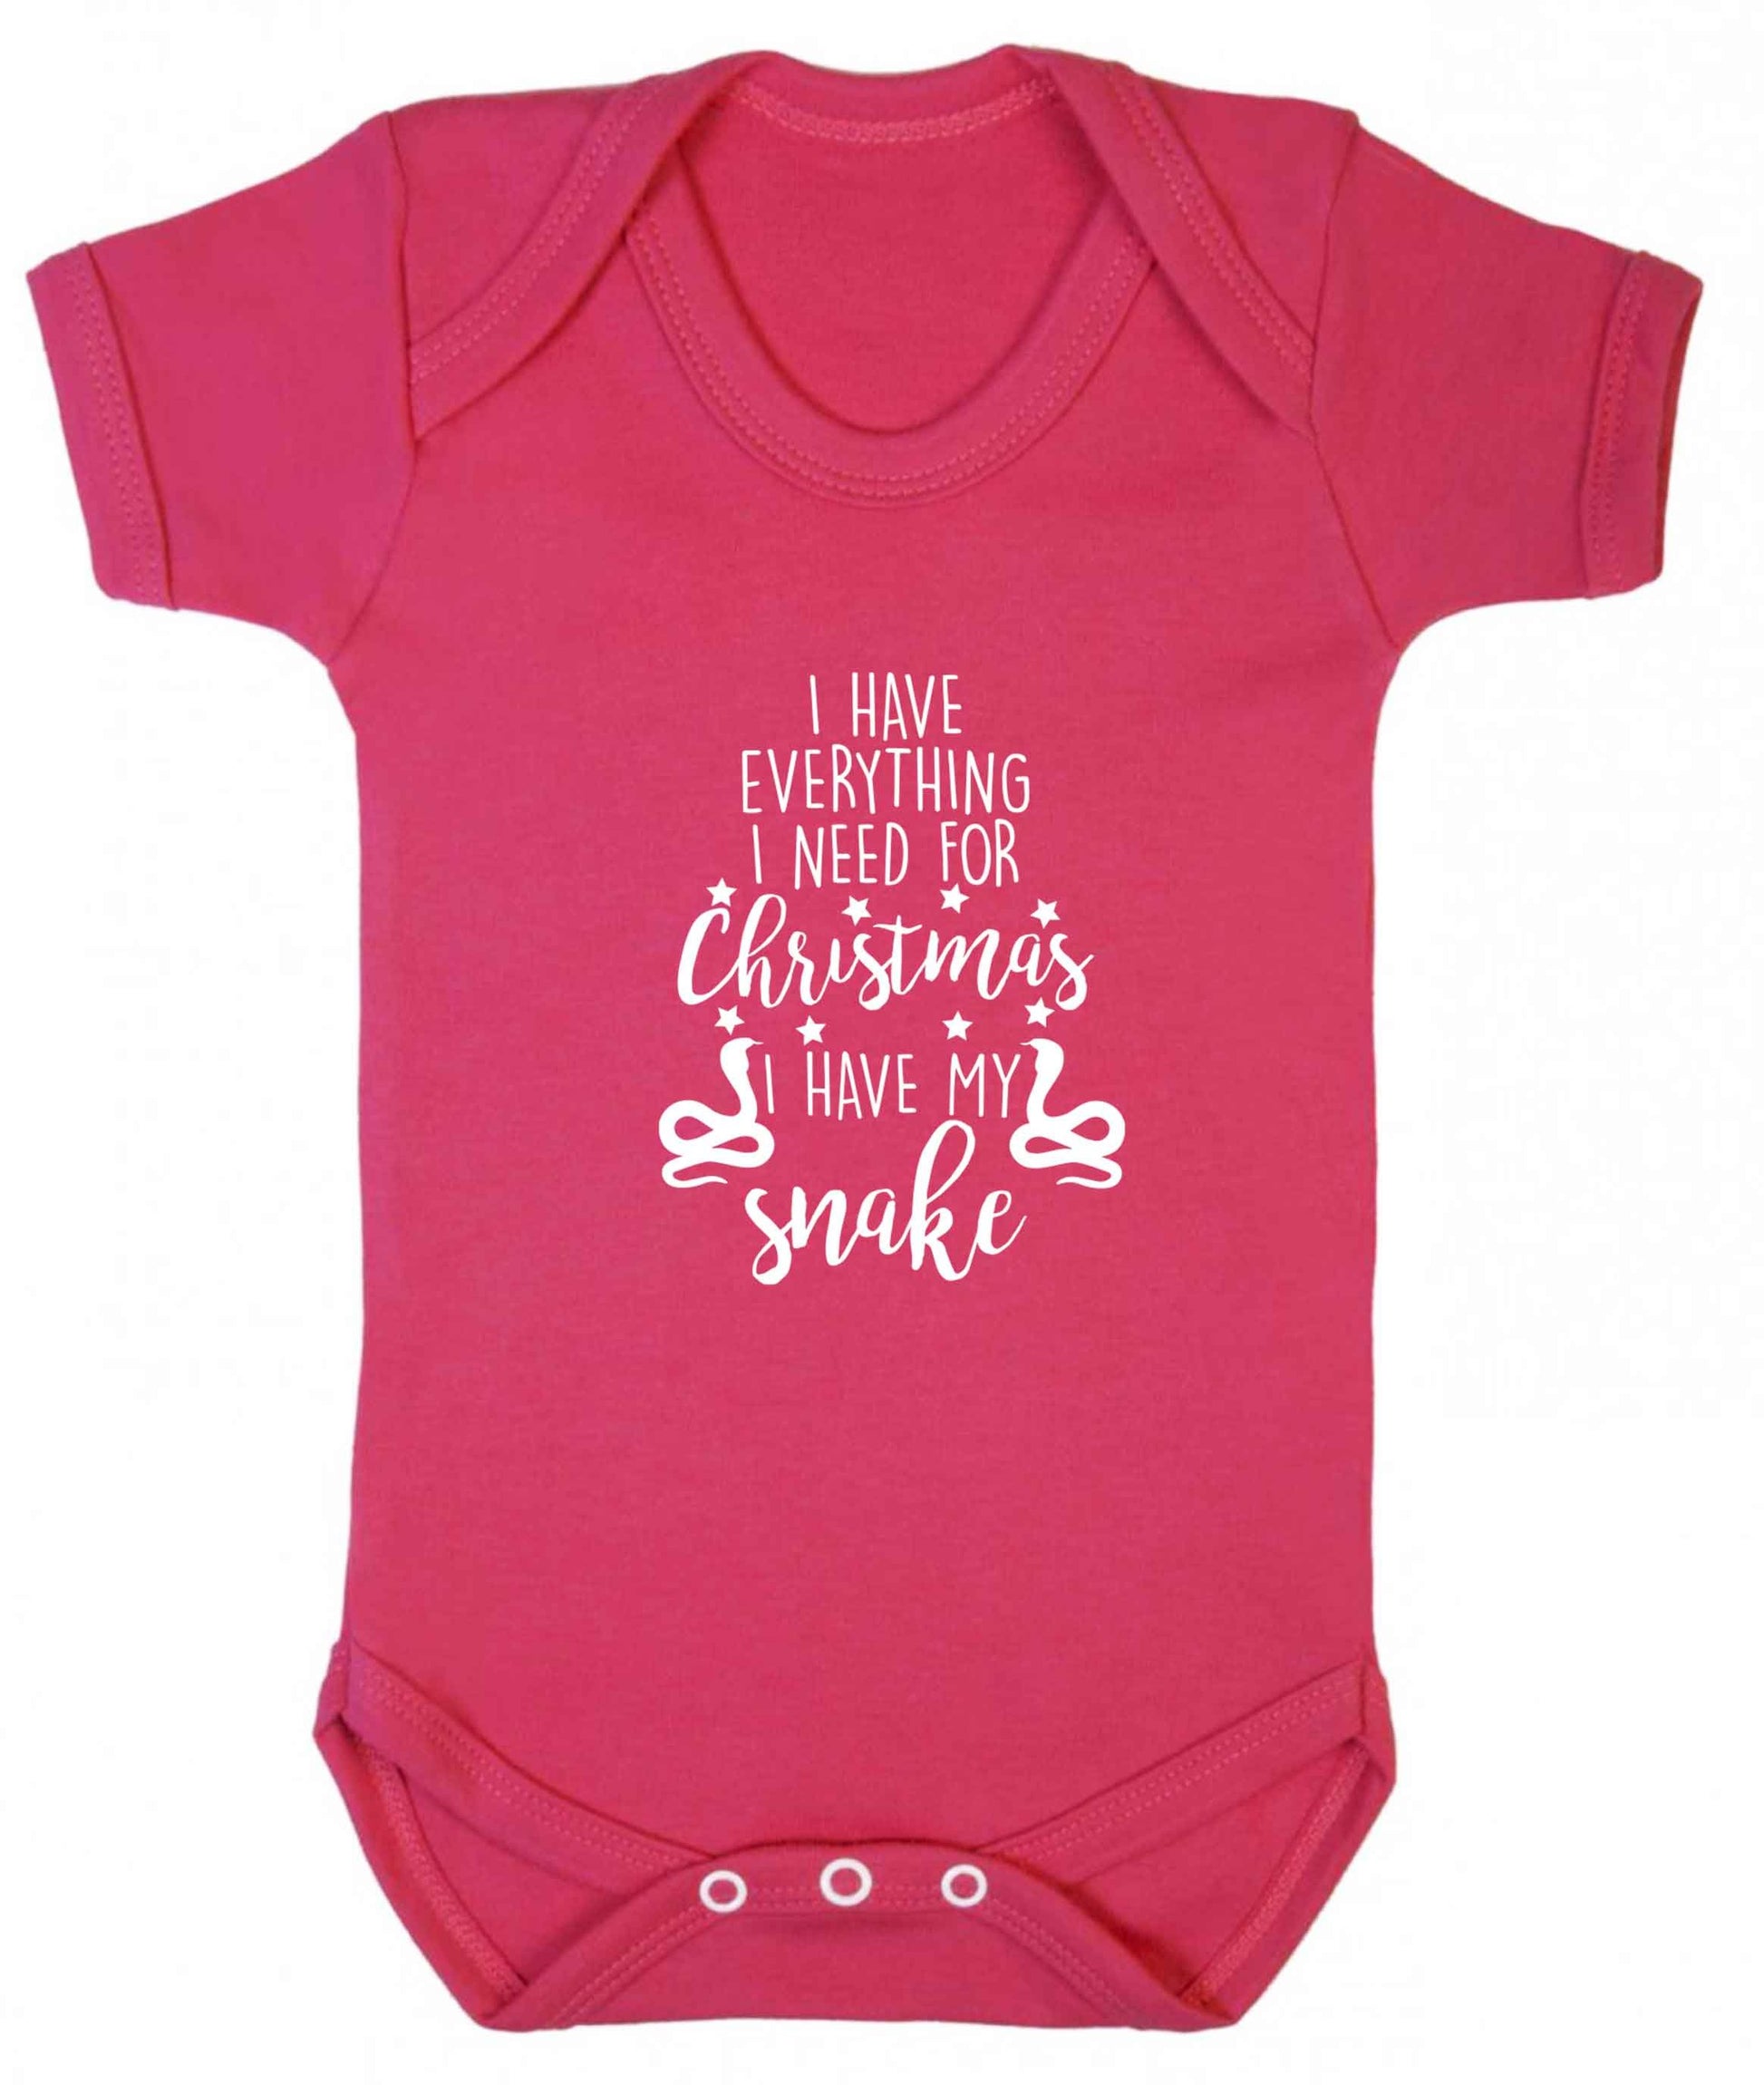 I have everything I need for Christmas I have my snake baby vest dark pink 18-24 months